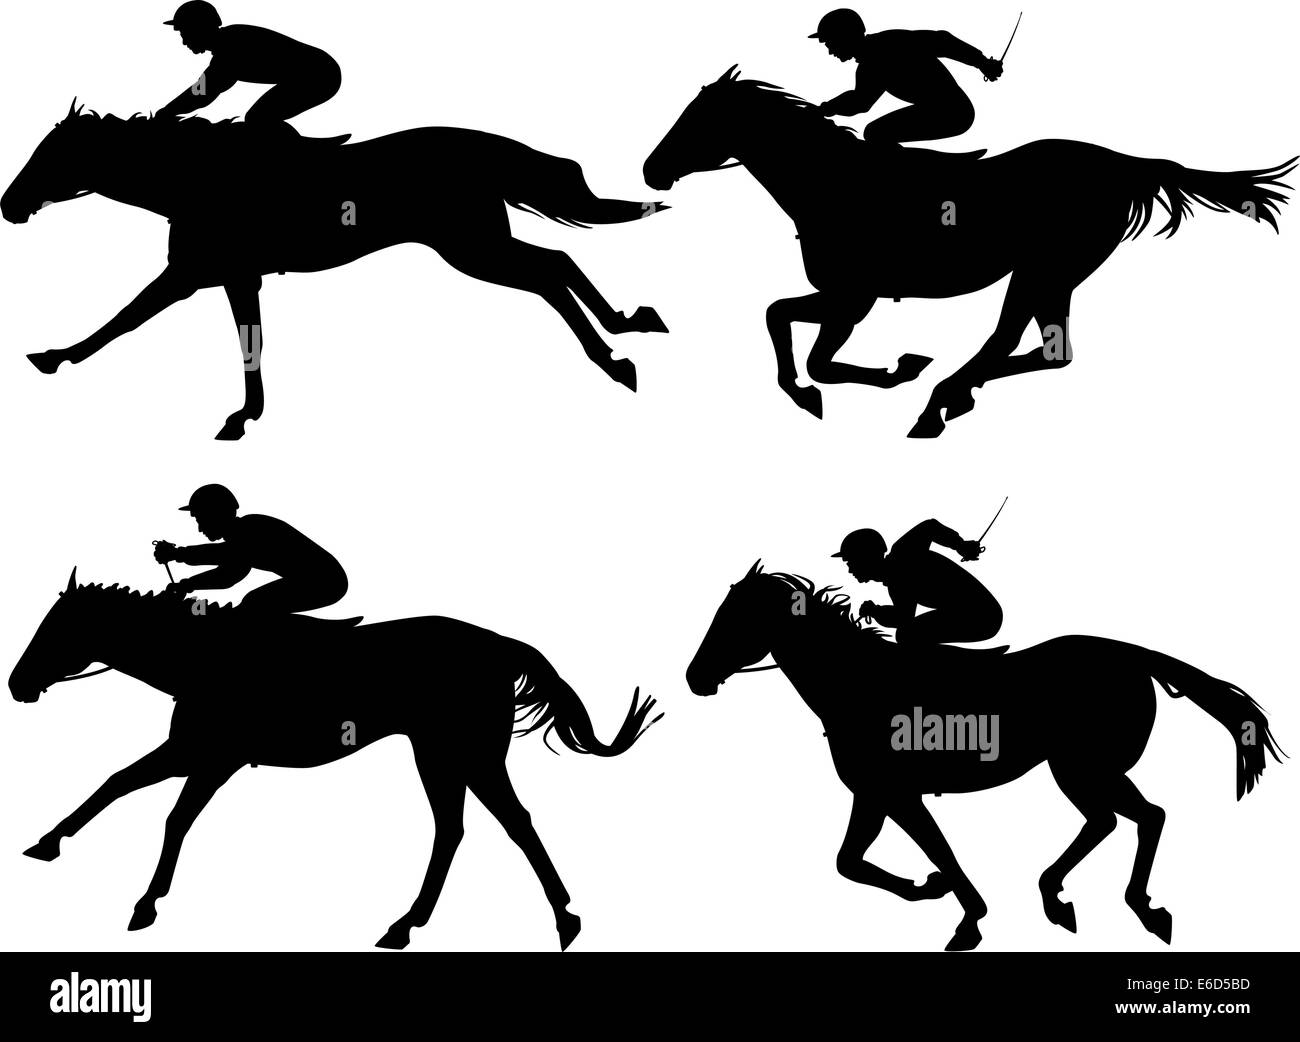 Editable vector silhouettes of racing horses with horses and jockeys as separate objects Stock Vector